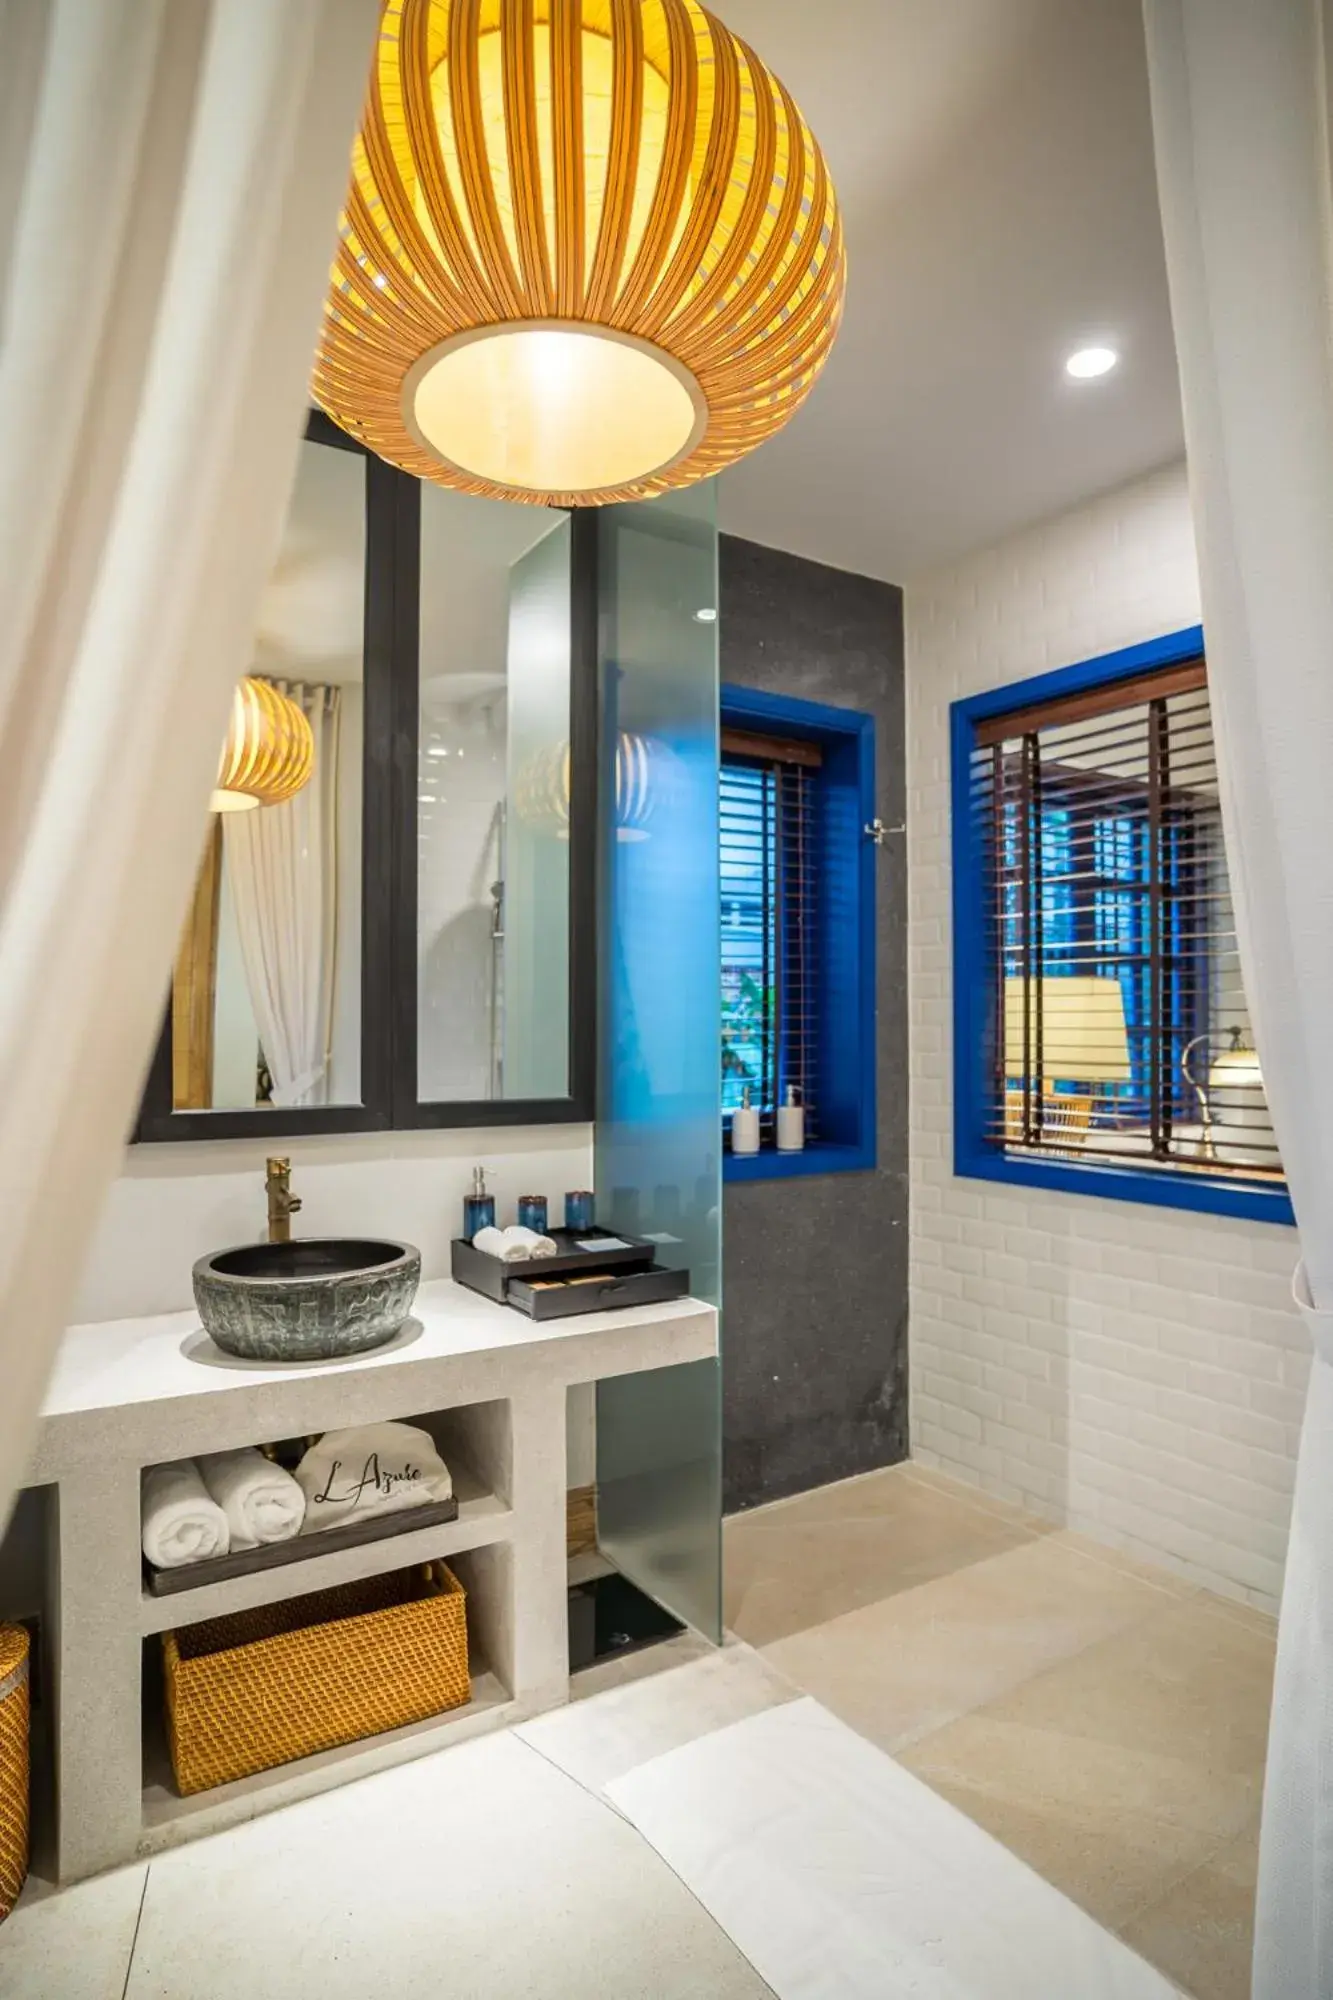 Bathroom in L'Azure Resort and Spa